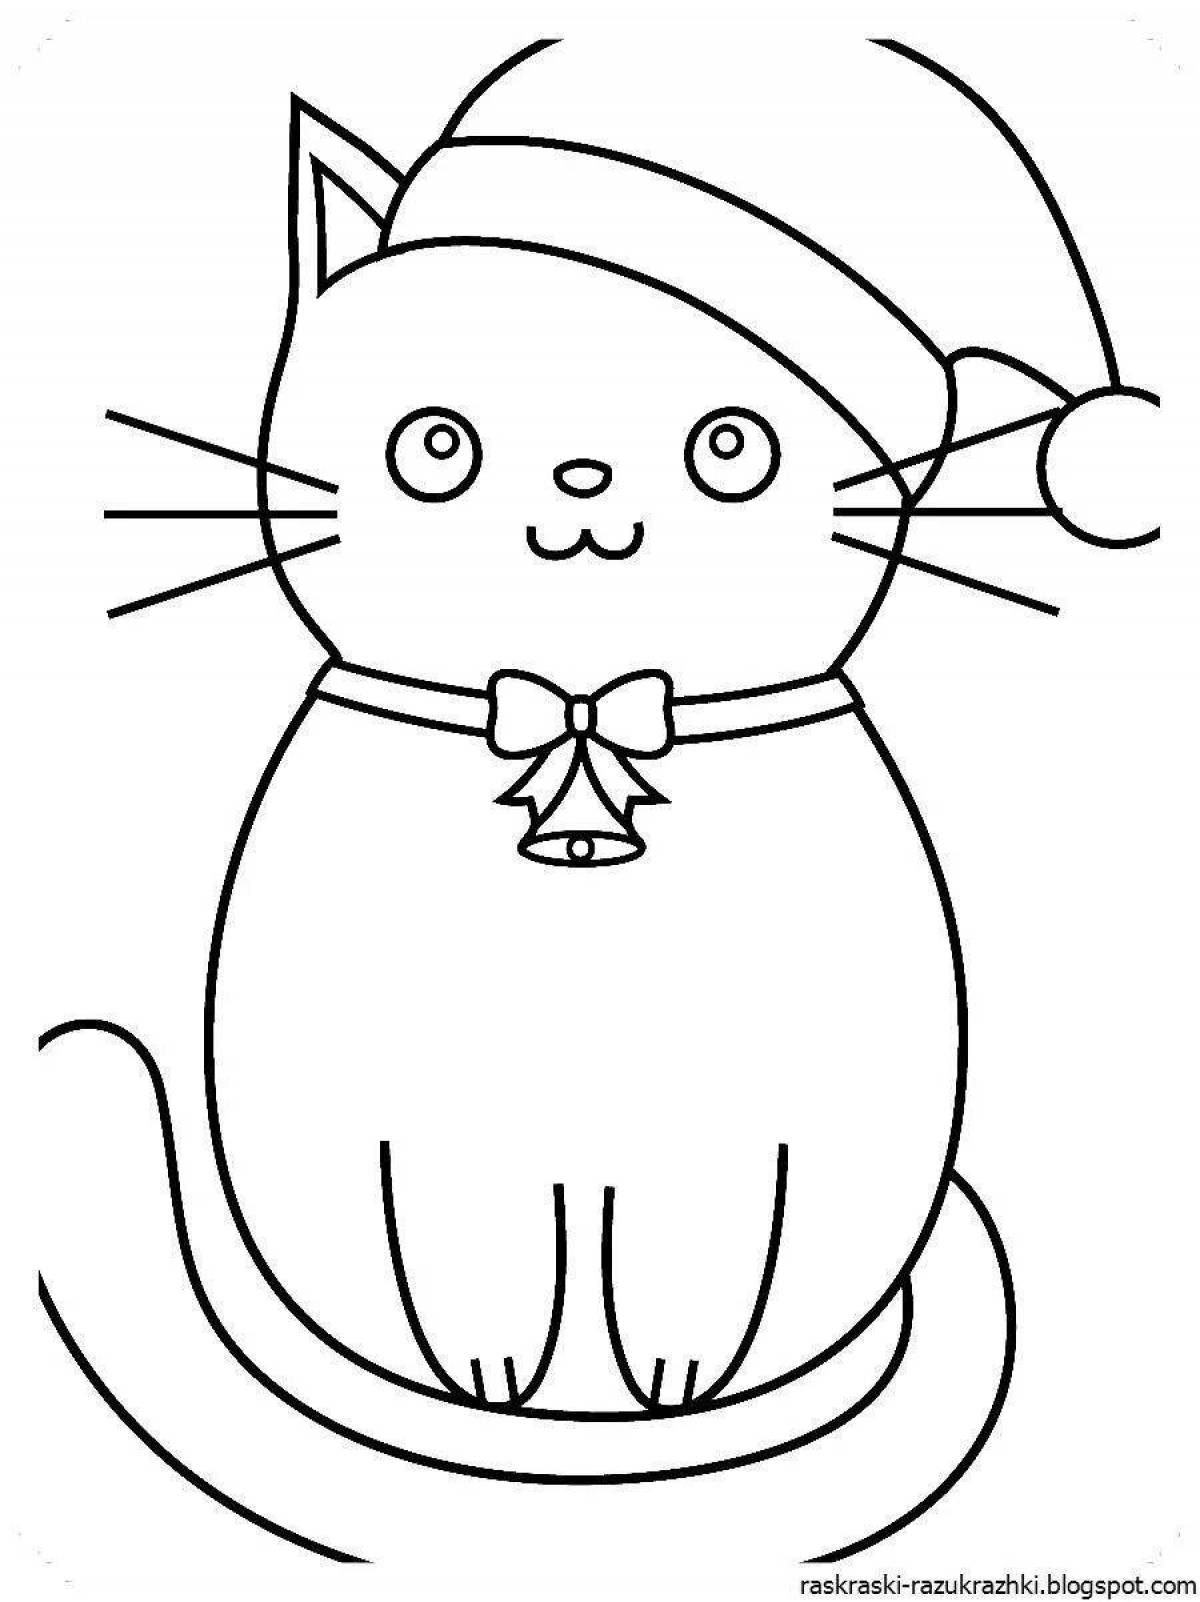 Great Christmas cat coloring book